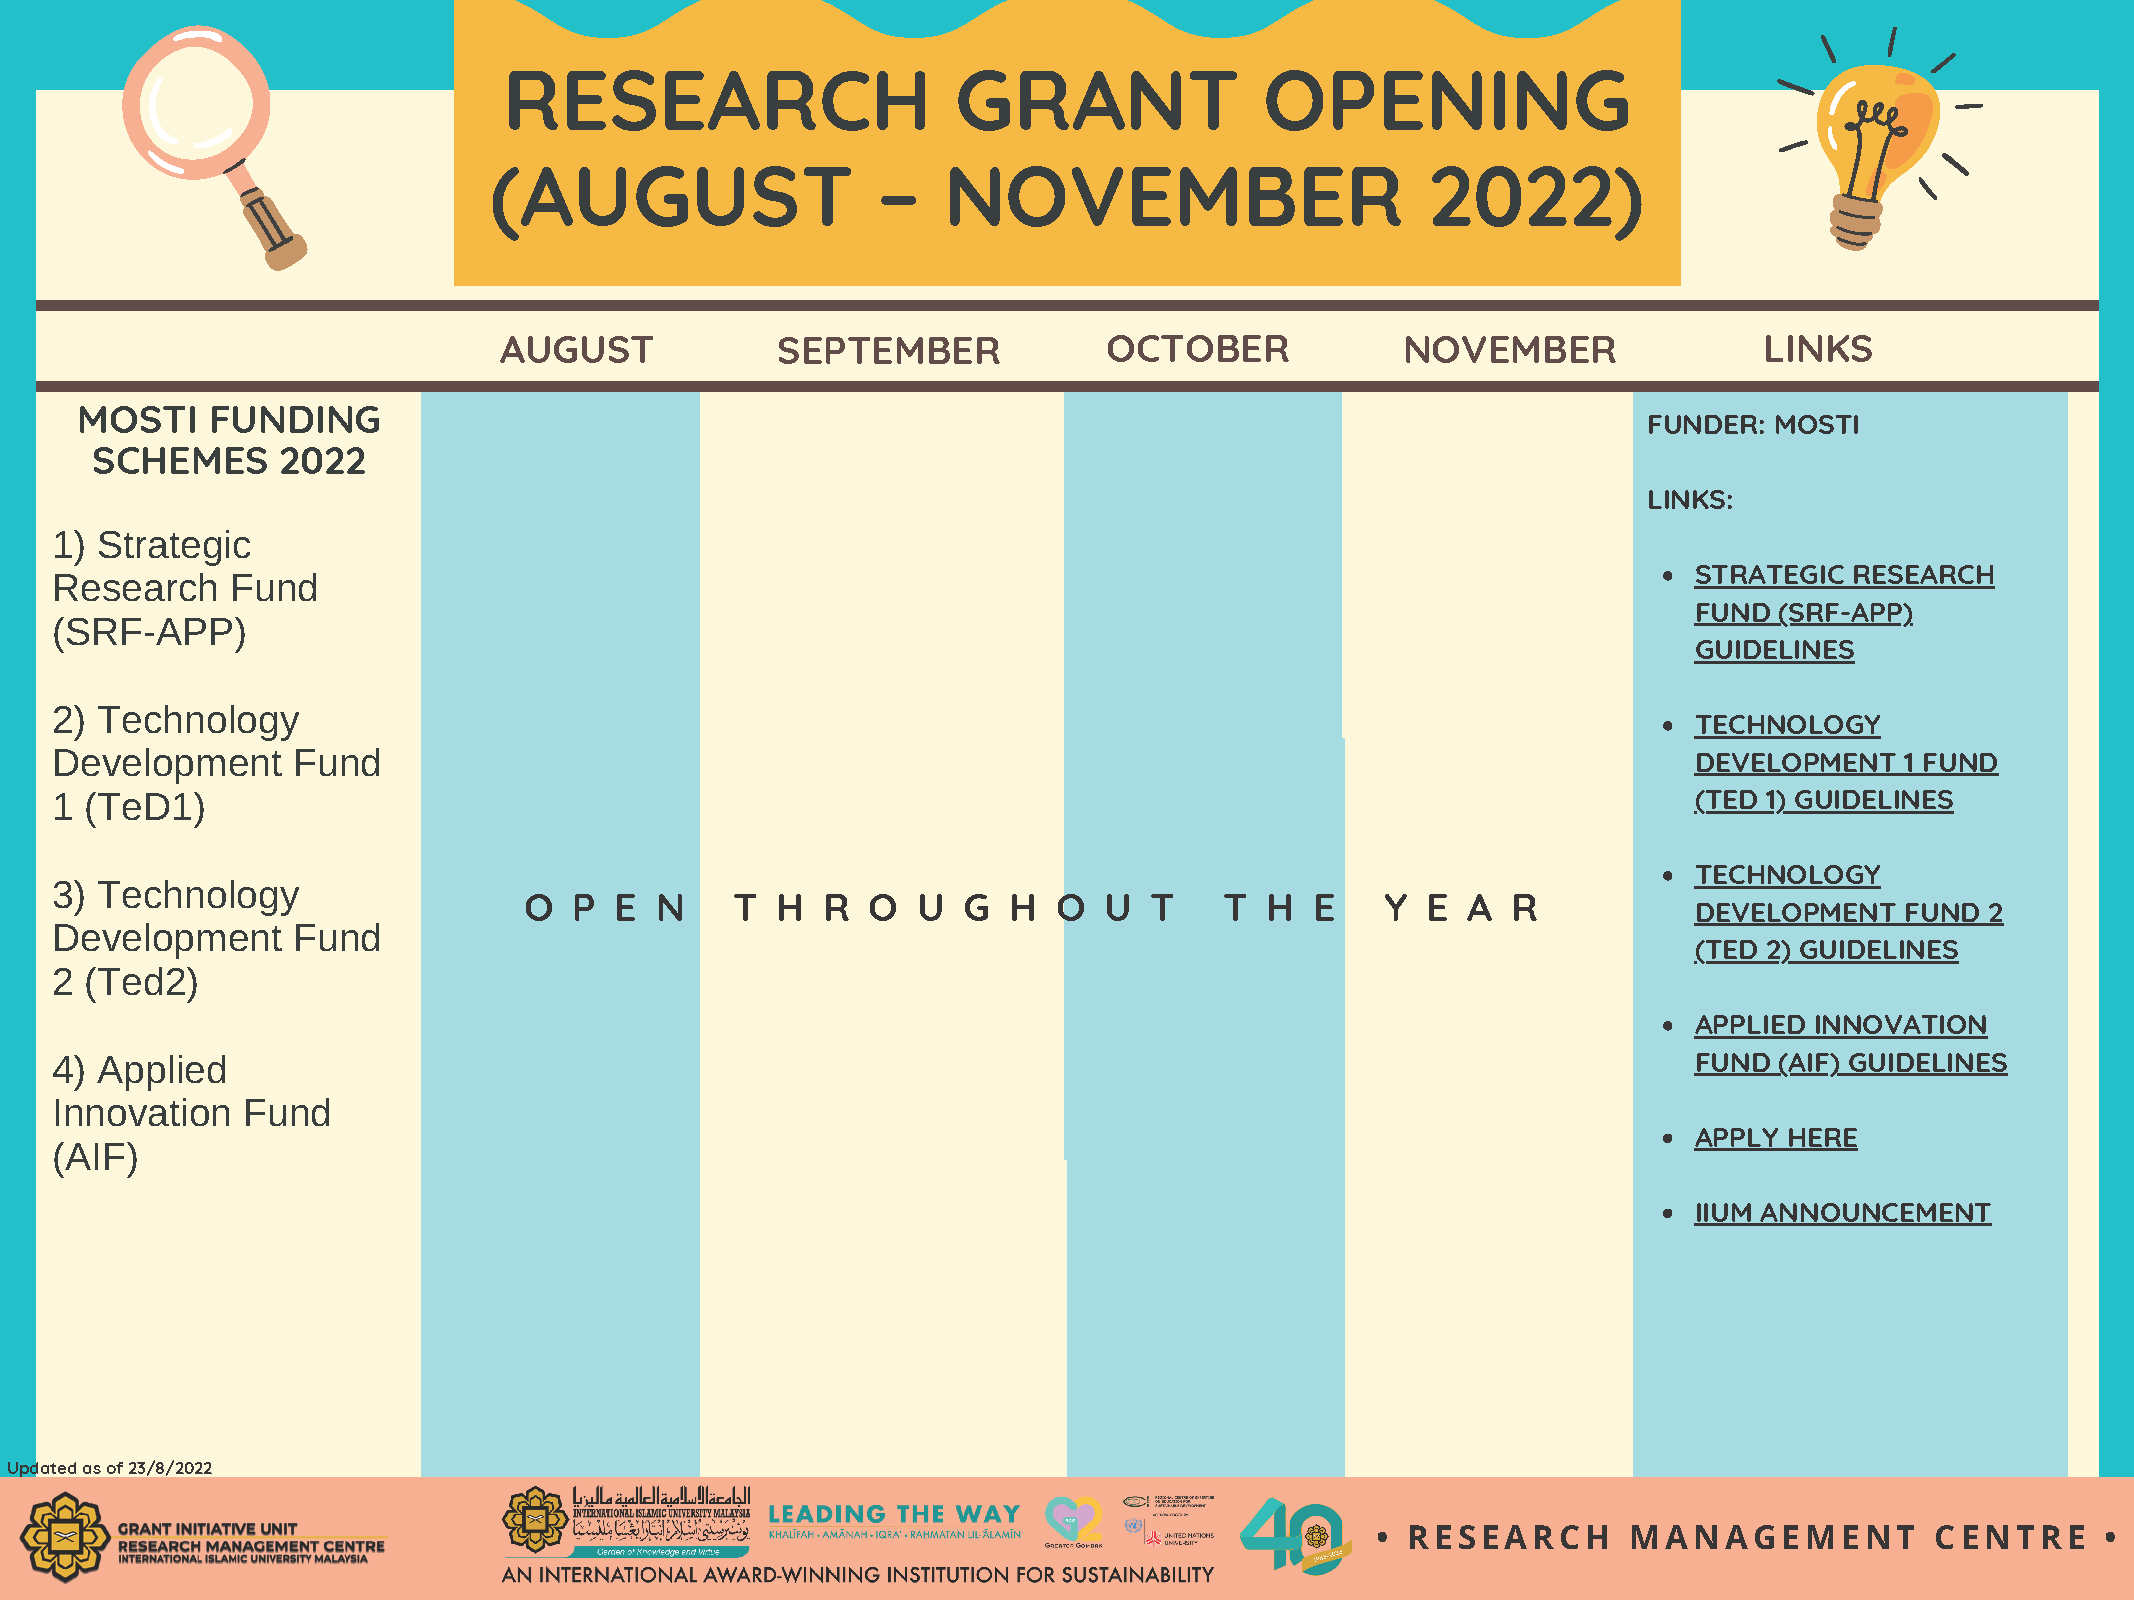 RESEARCH GRANT OPENING (AUGUST – NOVEMBER 2022) AS OF 23 AUGUST 2022